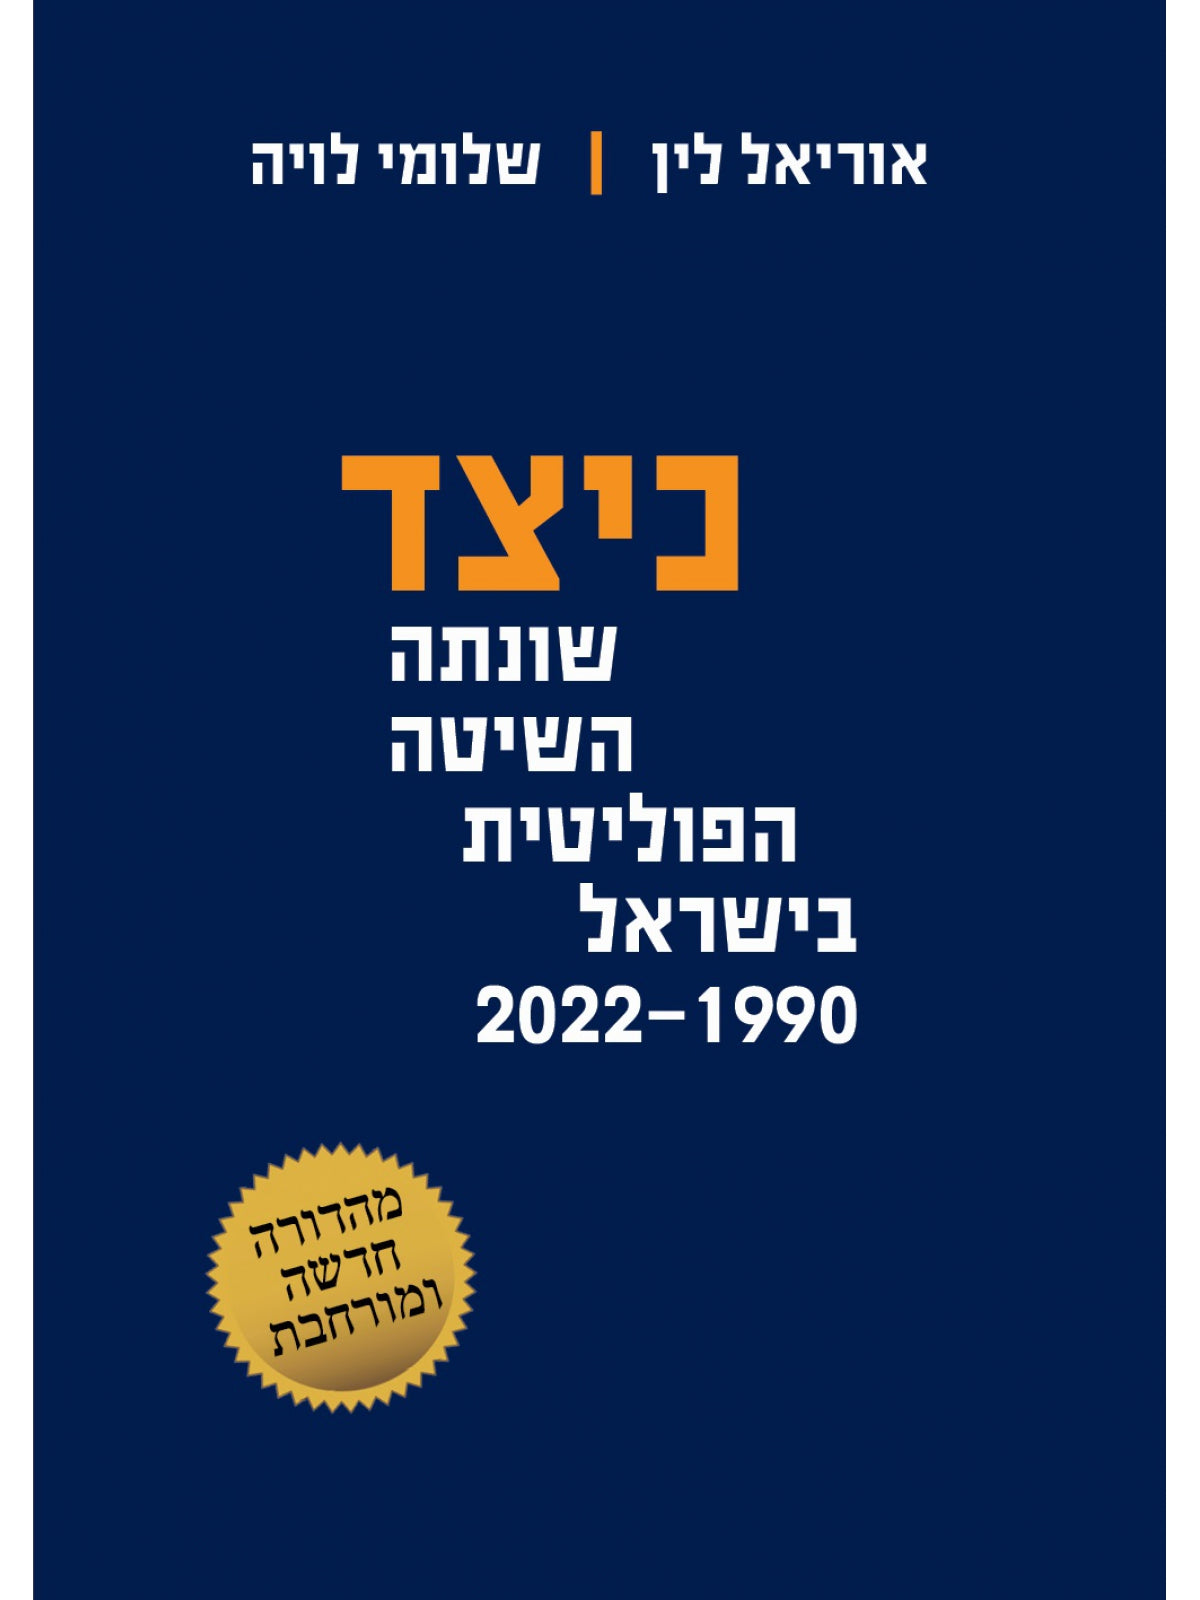 HOW THE POLITICAL SYSTEM IN ISRAEL HAS CHANGED 1990-2022